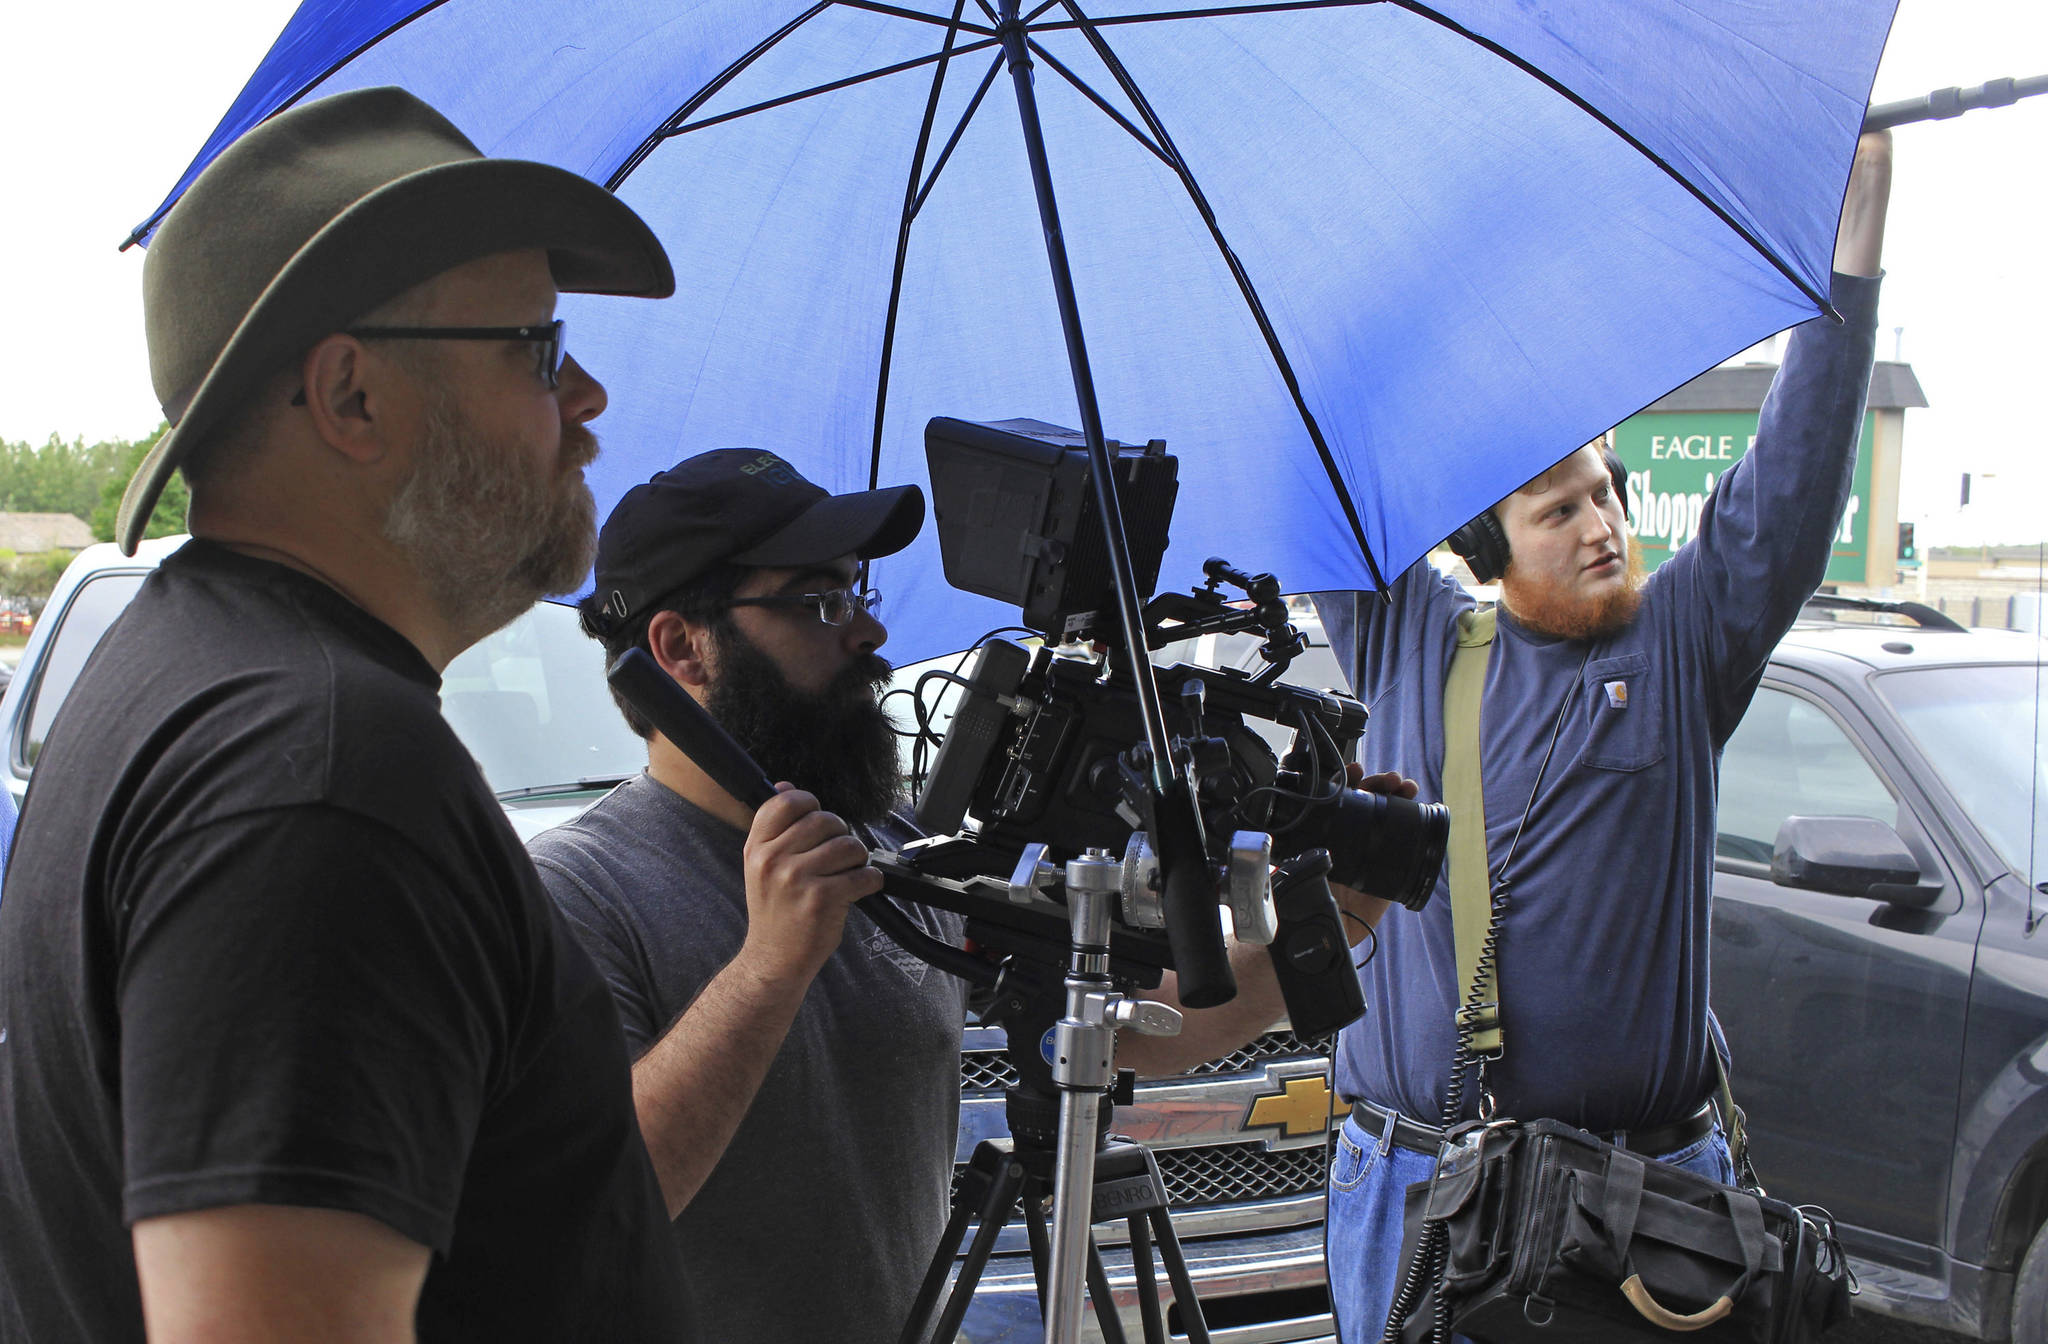 In an Aug. 9 photo, director Charles Baird, left, director of photography Michael Bergstrom, center, and sound man Andrew Wolfe film a scene from “Telltale” in Eagle River, Alaska. The film is one of two independent movies produced by Alaska filmmaker Charles Baird that were filmed in Eagle River the summer of 2017. (Kirsten Swann/Chugiak-Eagle River Star via AP)